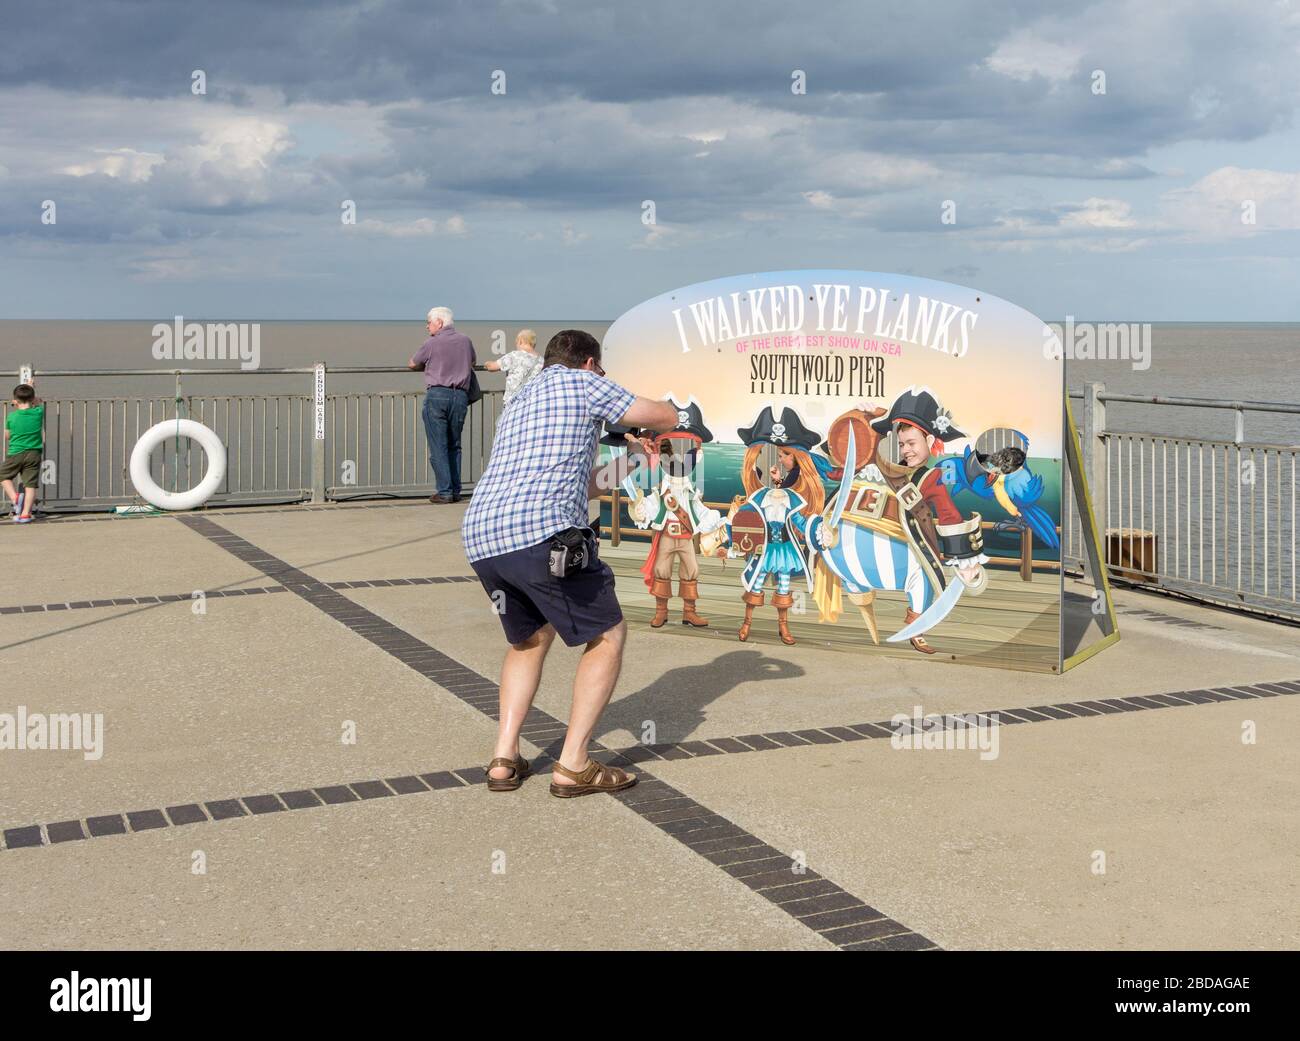 Man photographing his children through a pirate themed cut out board, Southwold Pier, Suffolk, UK Stock Photo